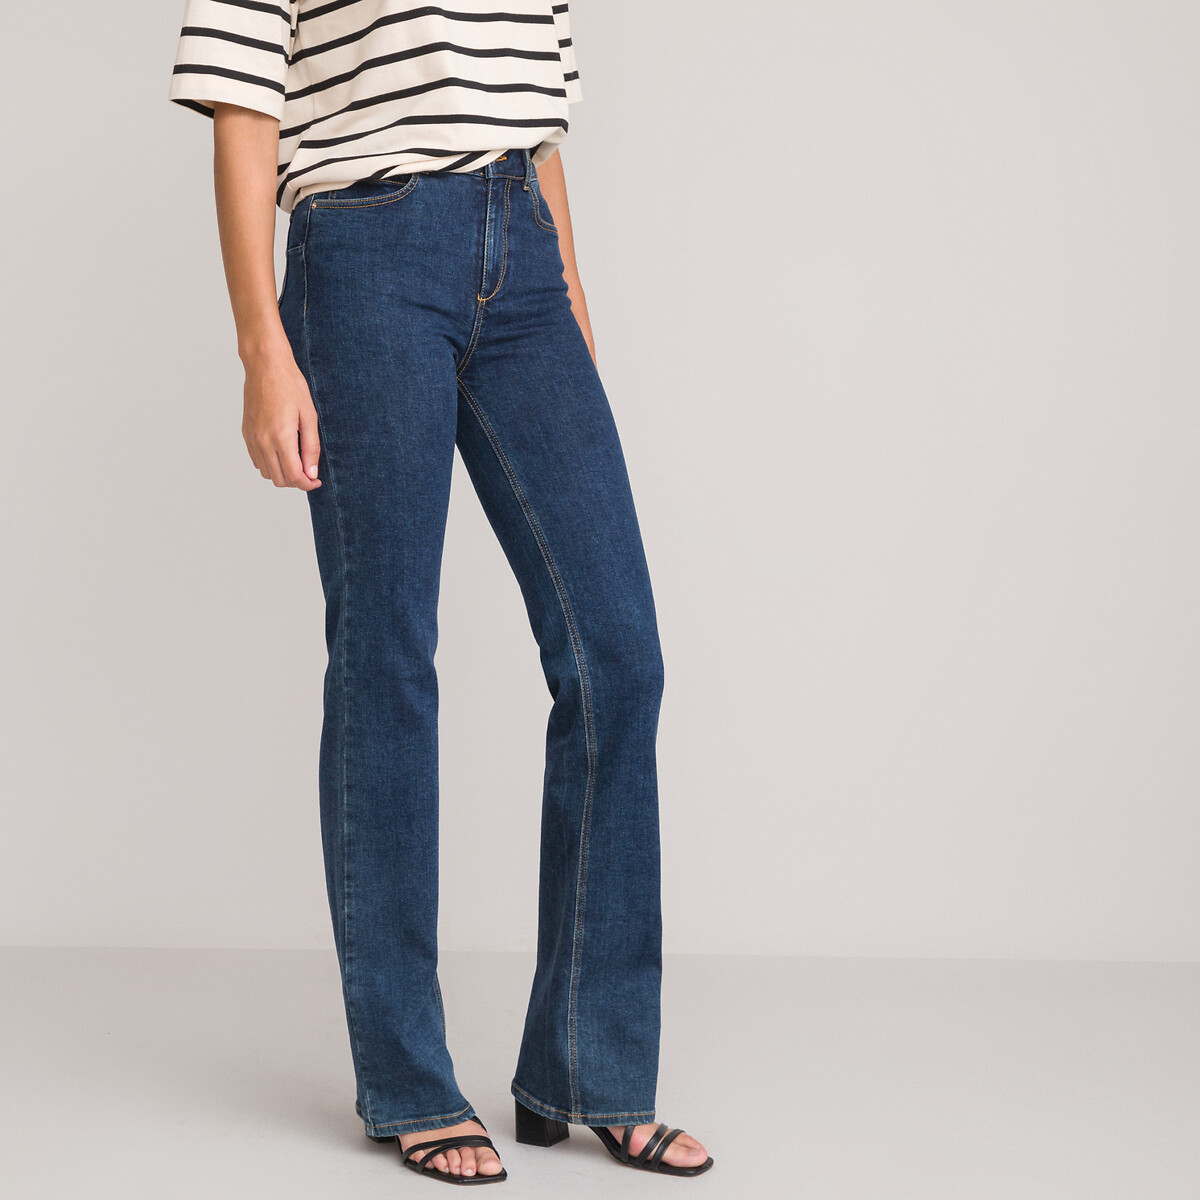 Push-Up Bootcut Jeans, Mid Rise Length 33"